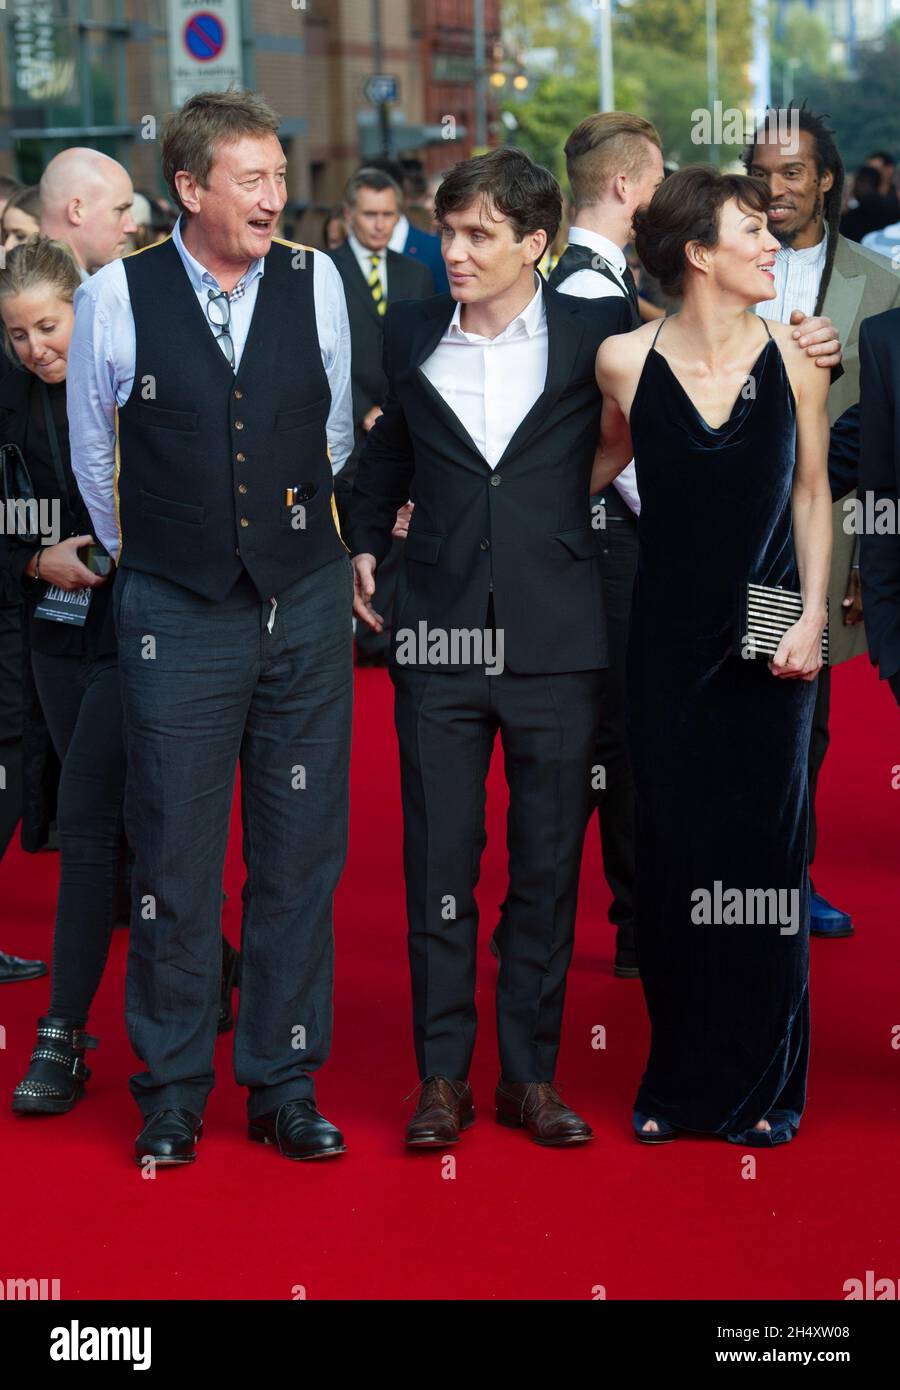 Cillian Murphy, Helen McCrory and Steven Knight attending the world premiere screening of the first episode of the new series Peaky Blinders at Cineworld Broad Street in Birmingham on Sunday 21st September Stock Photo